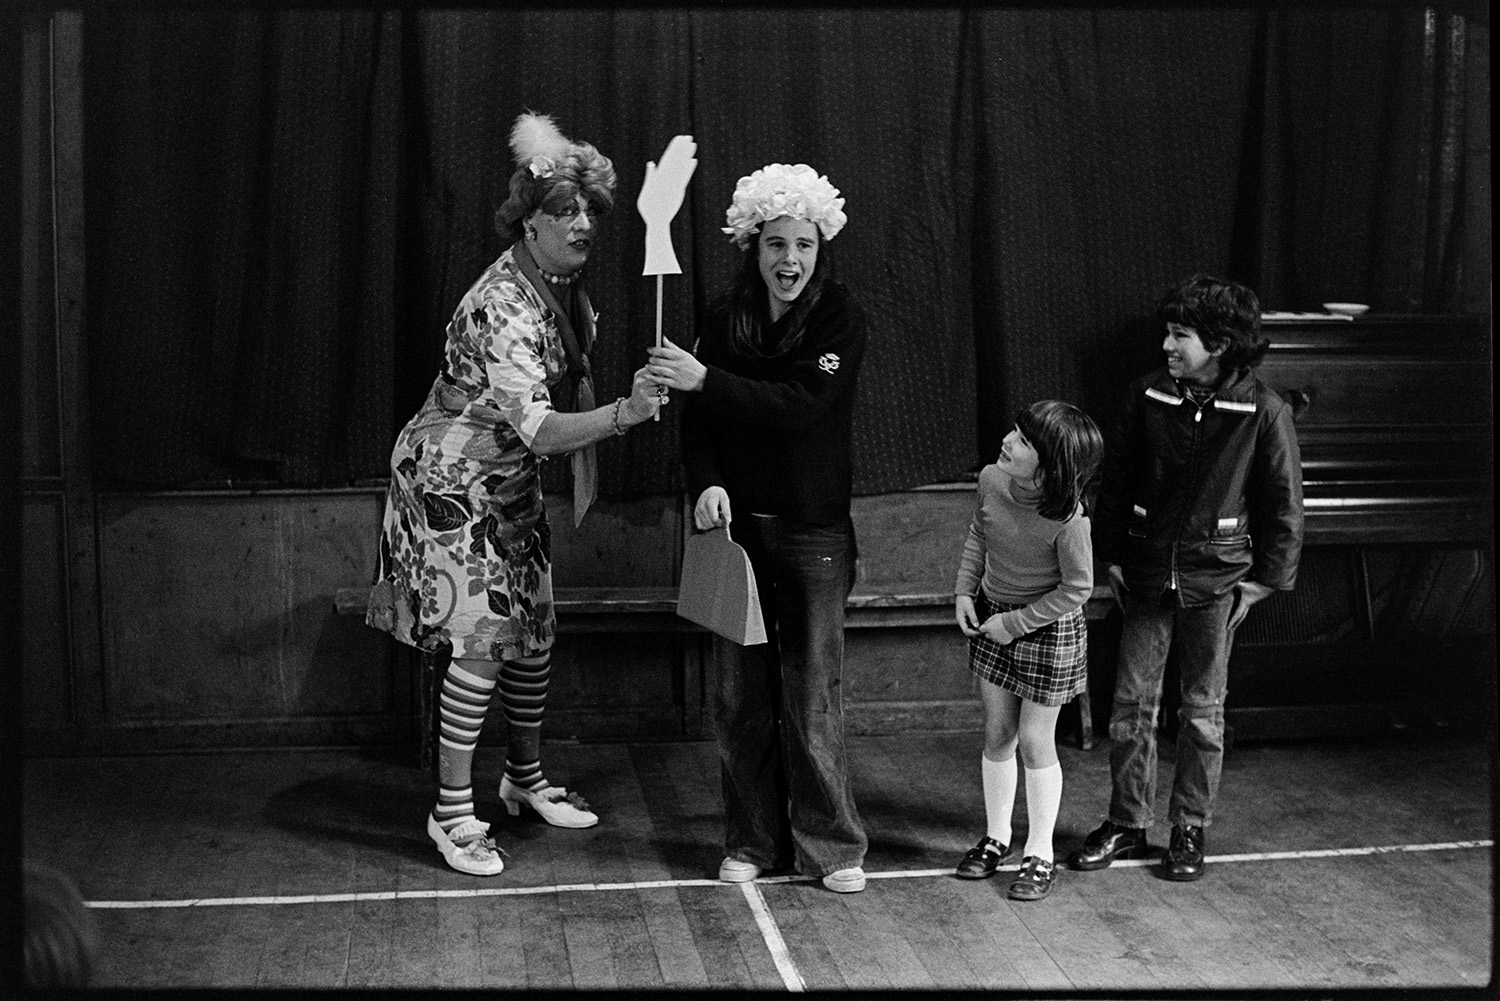 Drag artist in school, with children. 
[The drag artist Henrietta Sluggit posing with three school children in a school hall. One of the children is holding props and wearing a wig. A piano is visible in the background.]